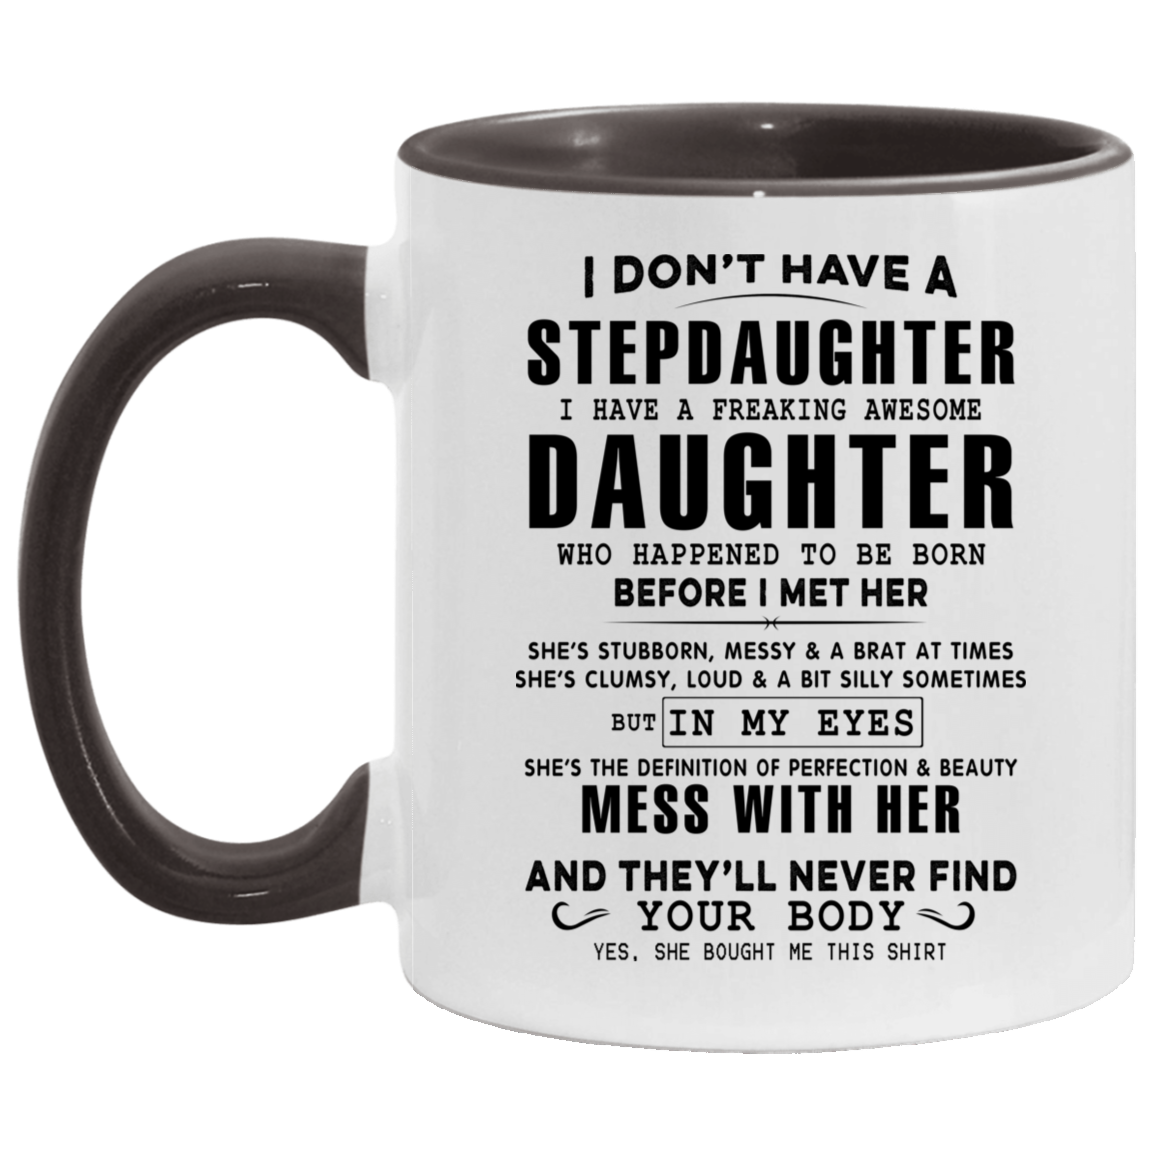 Stepdaughter 12oz Camper Mug from Father Stepdaughter Here's a Silly Mug to Remind You of Just how Awesome You Are Gag Stepdaughter Gifts